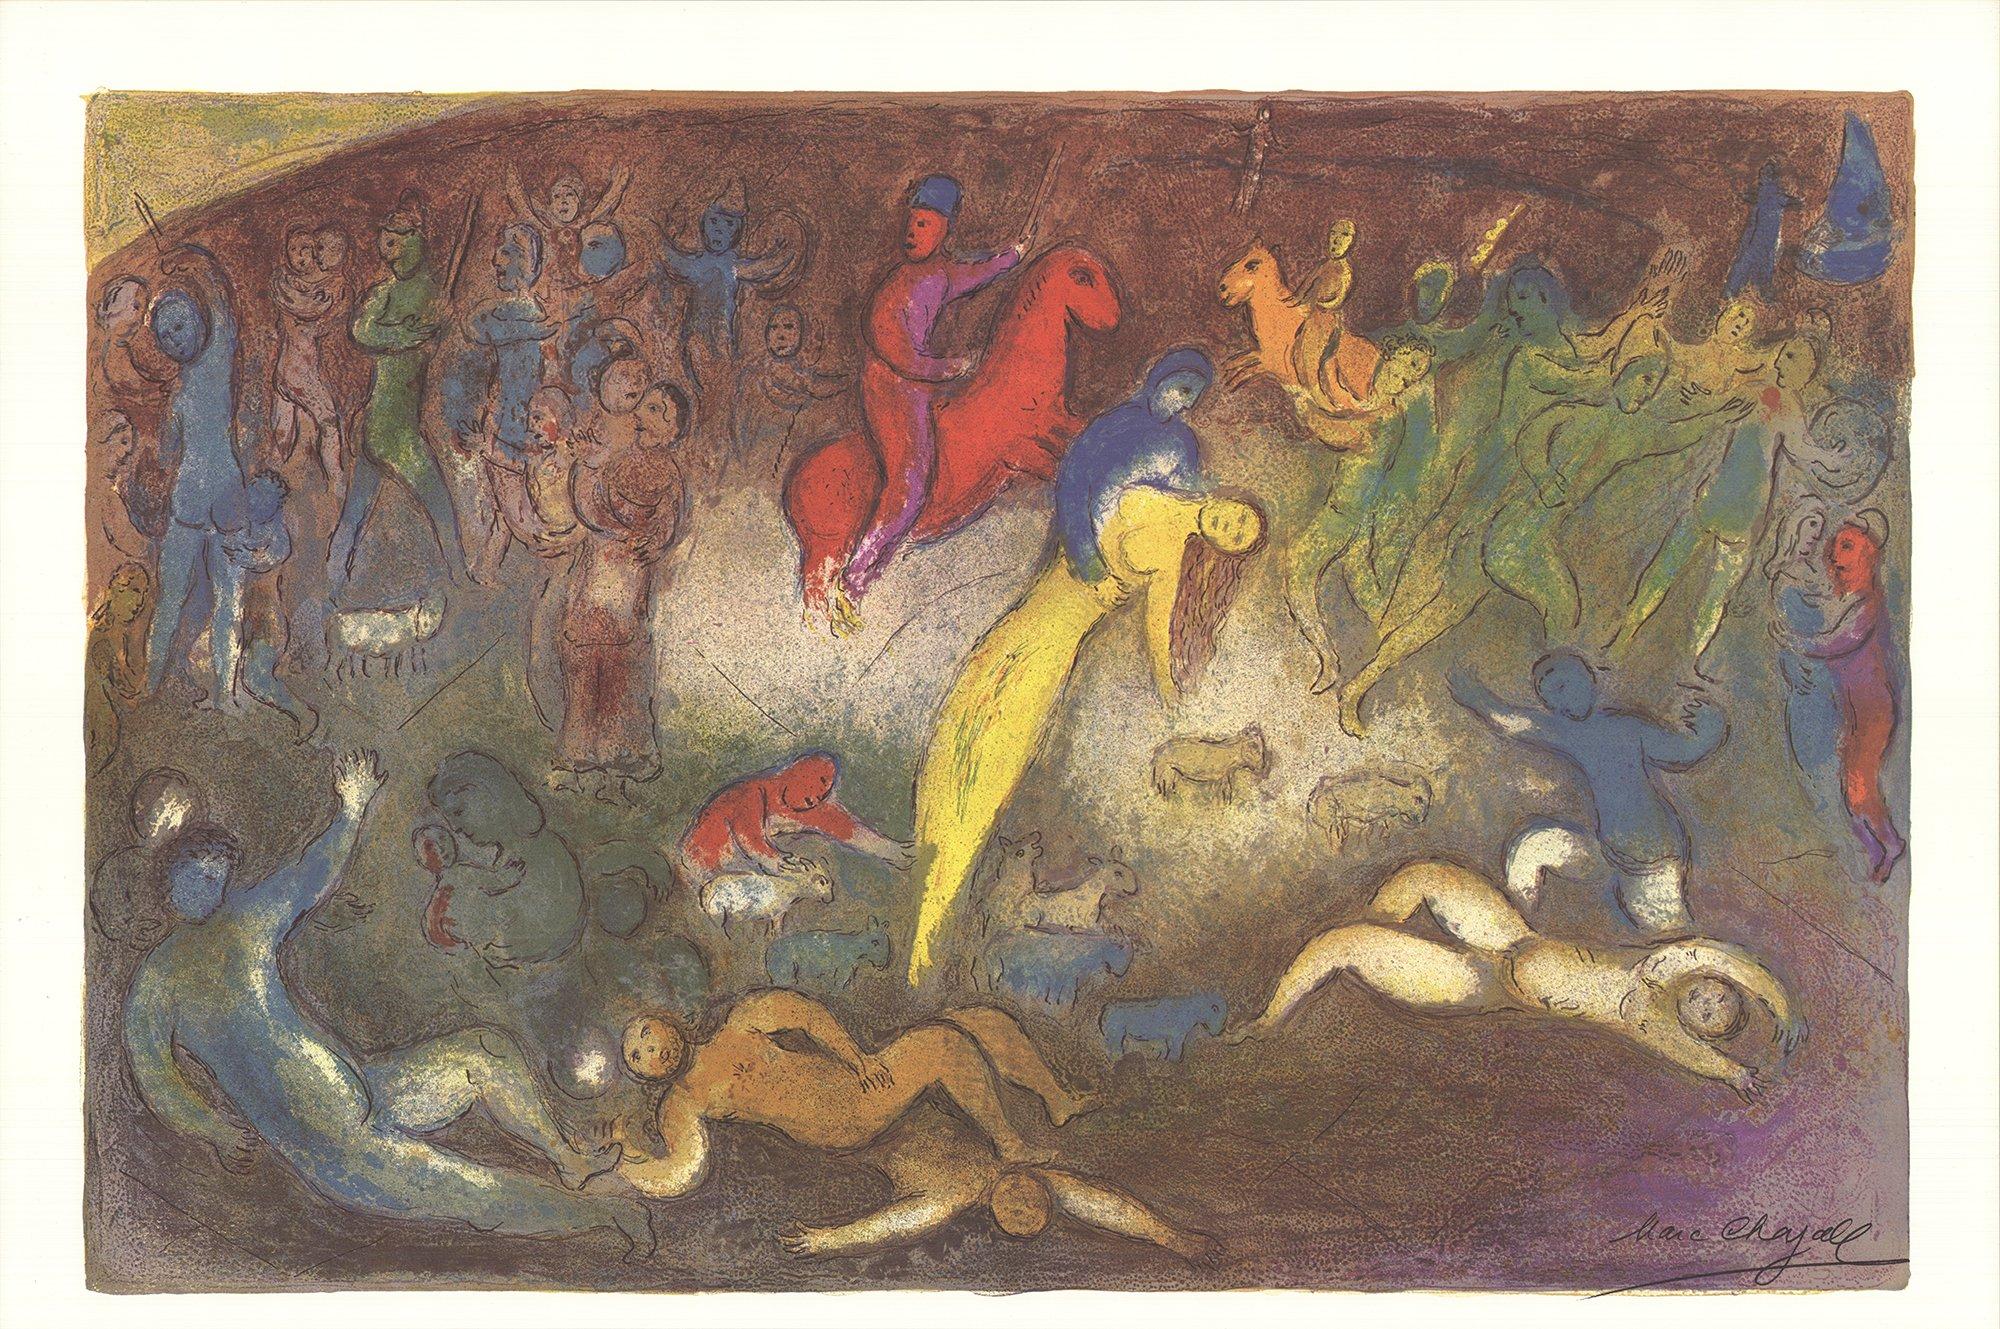 Paper Size: 22.25 x 33.5 inches ( 56.515 x 85.09 cm )
 Image Size: 20 x 30.5 inches ( 50.8 x 77.47 cm )
 Framed: No
 Condition: A: Mint
 
 Additional Details: Limited edition print by Marc Chagall titled "Abduction of Chloe". Signed in the plate and